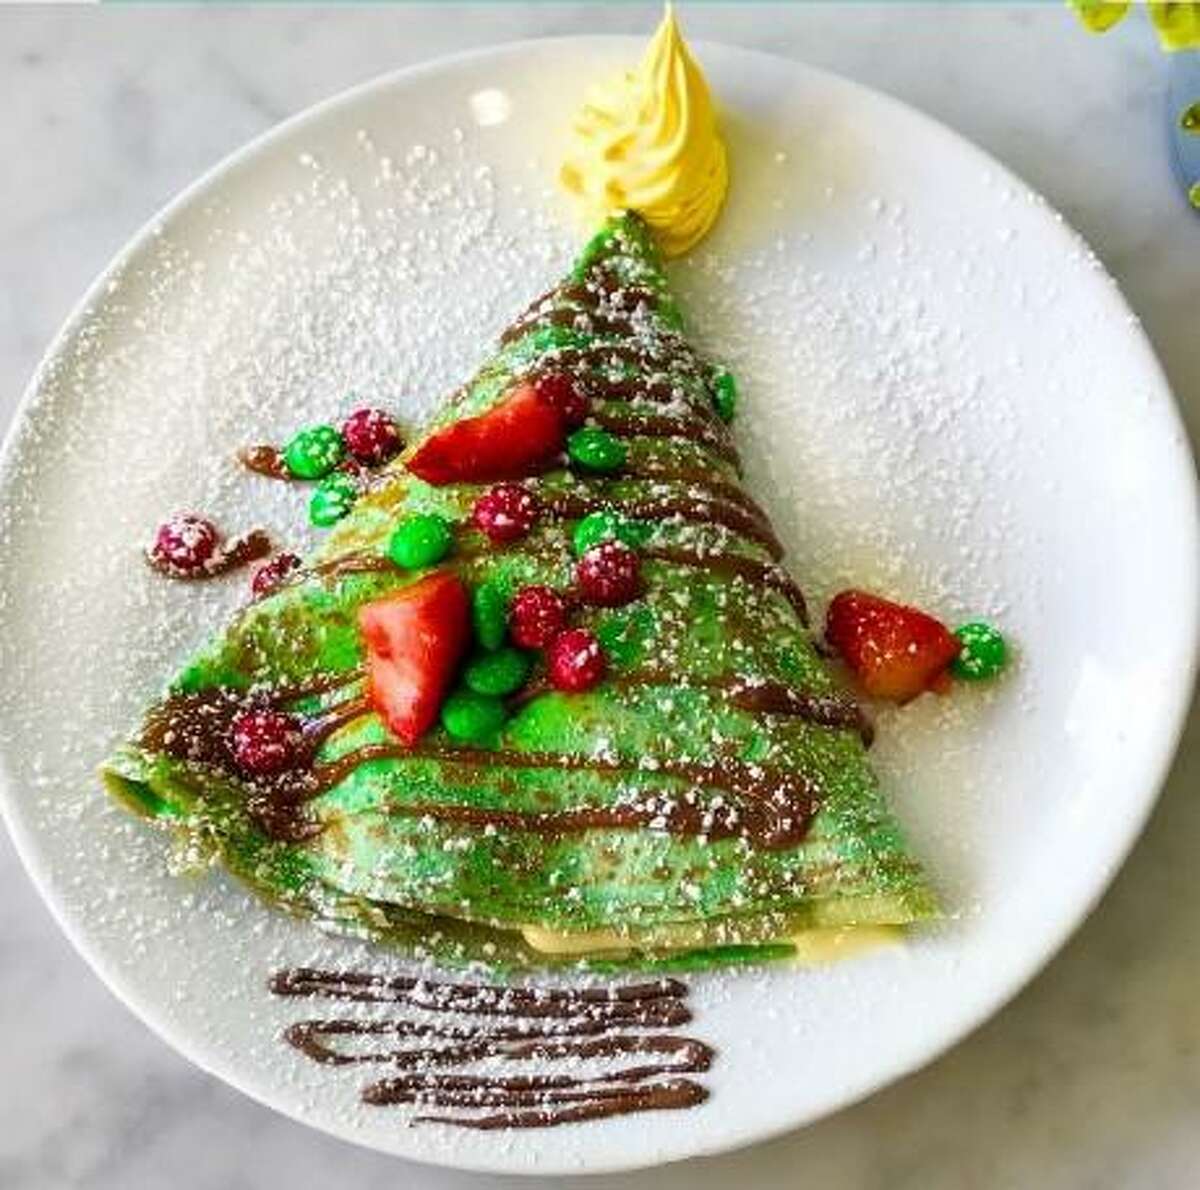 Eating at local restaurants and eateries helps support the Houston economy and create jobs. Right now, Sweet Paris Creperie and Cafe is serving The Grinch crepe.